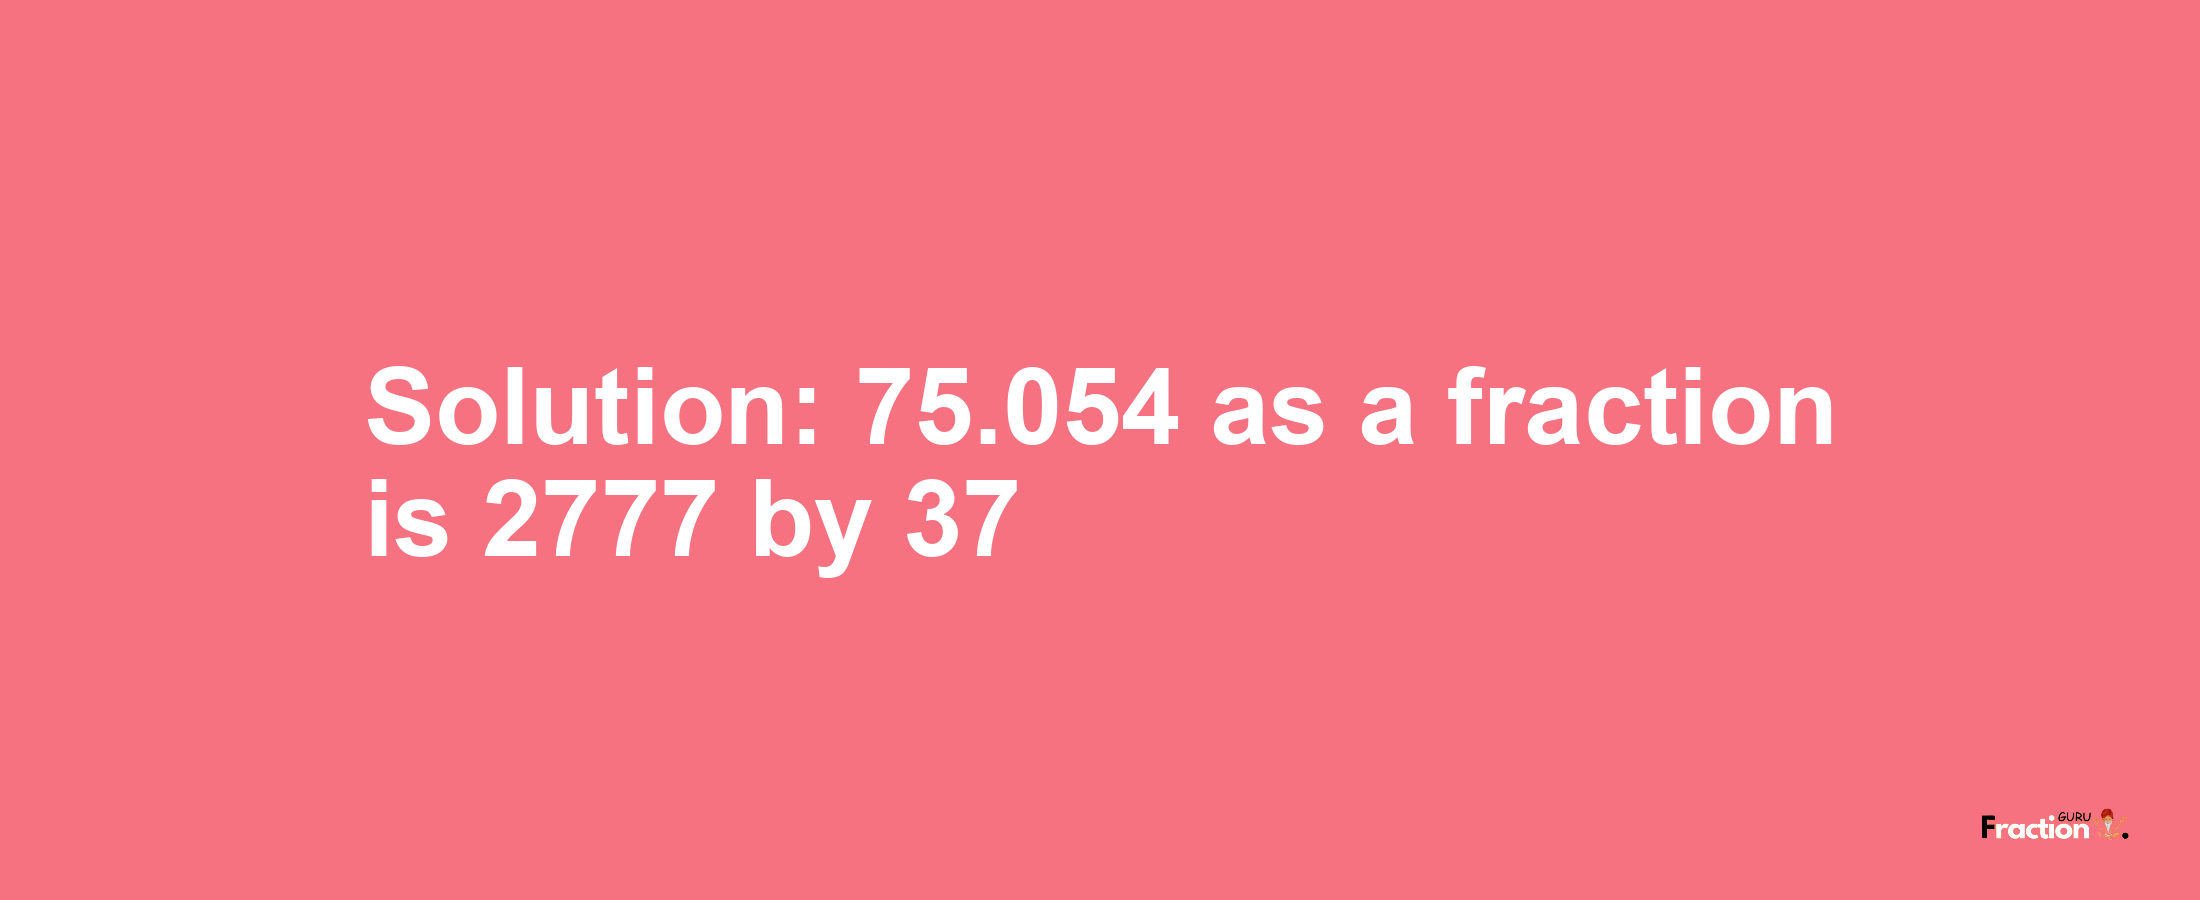 Solution:75.054 as a fraction is 2777/37